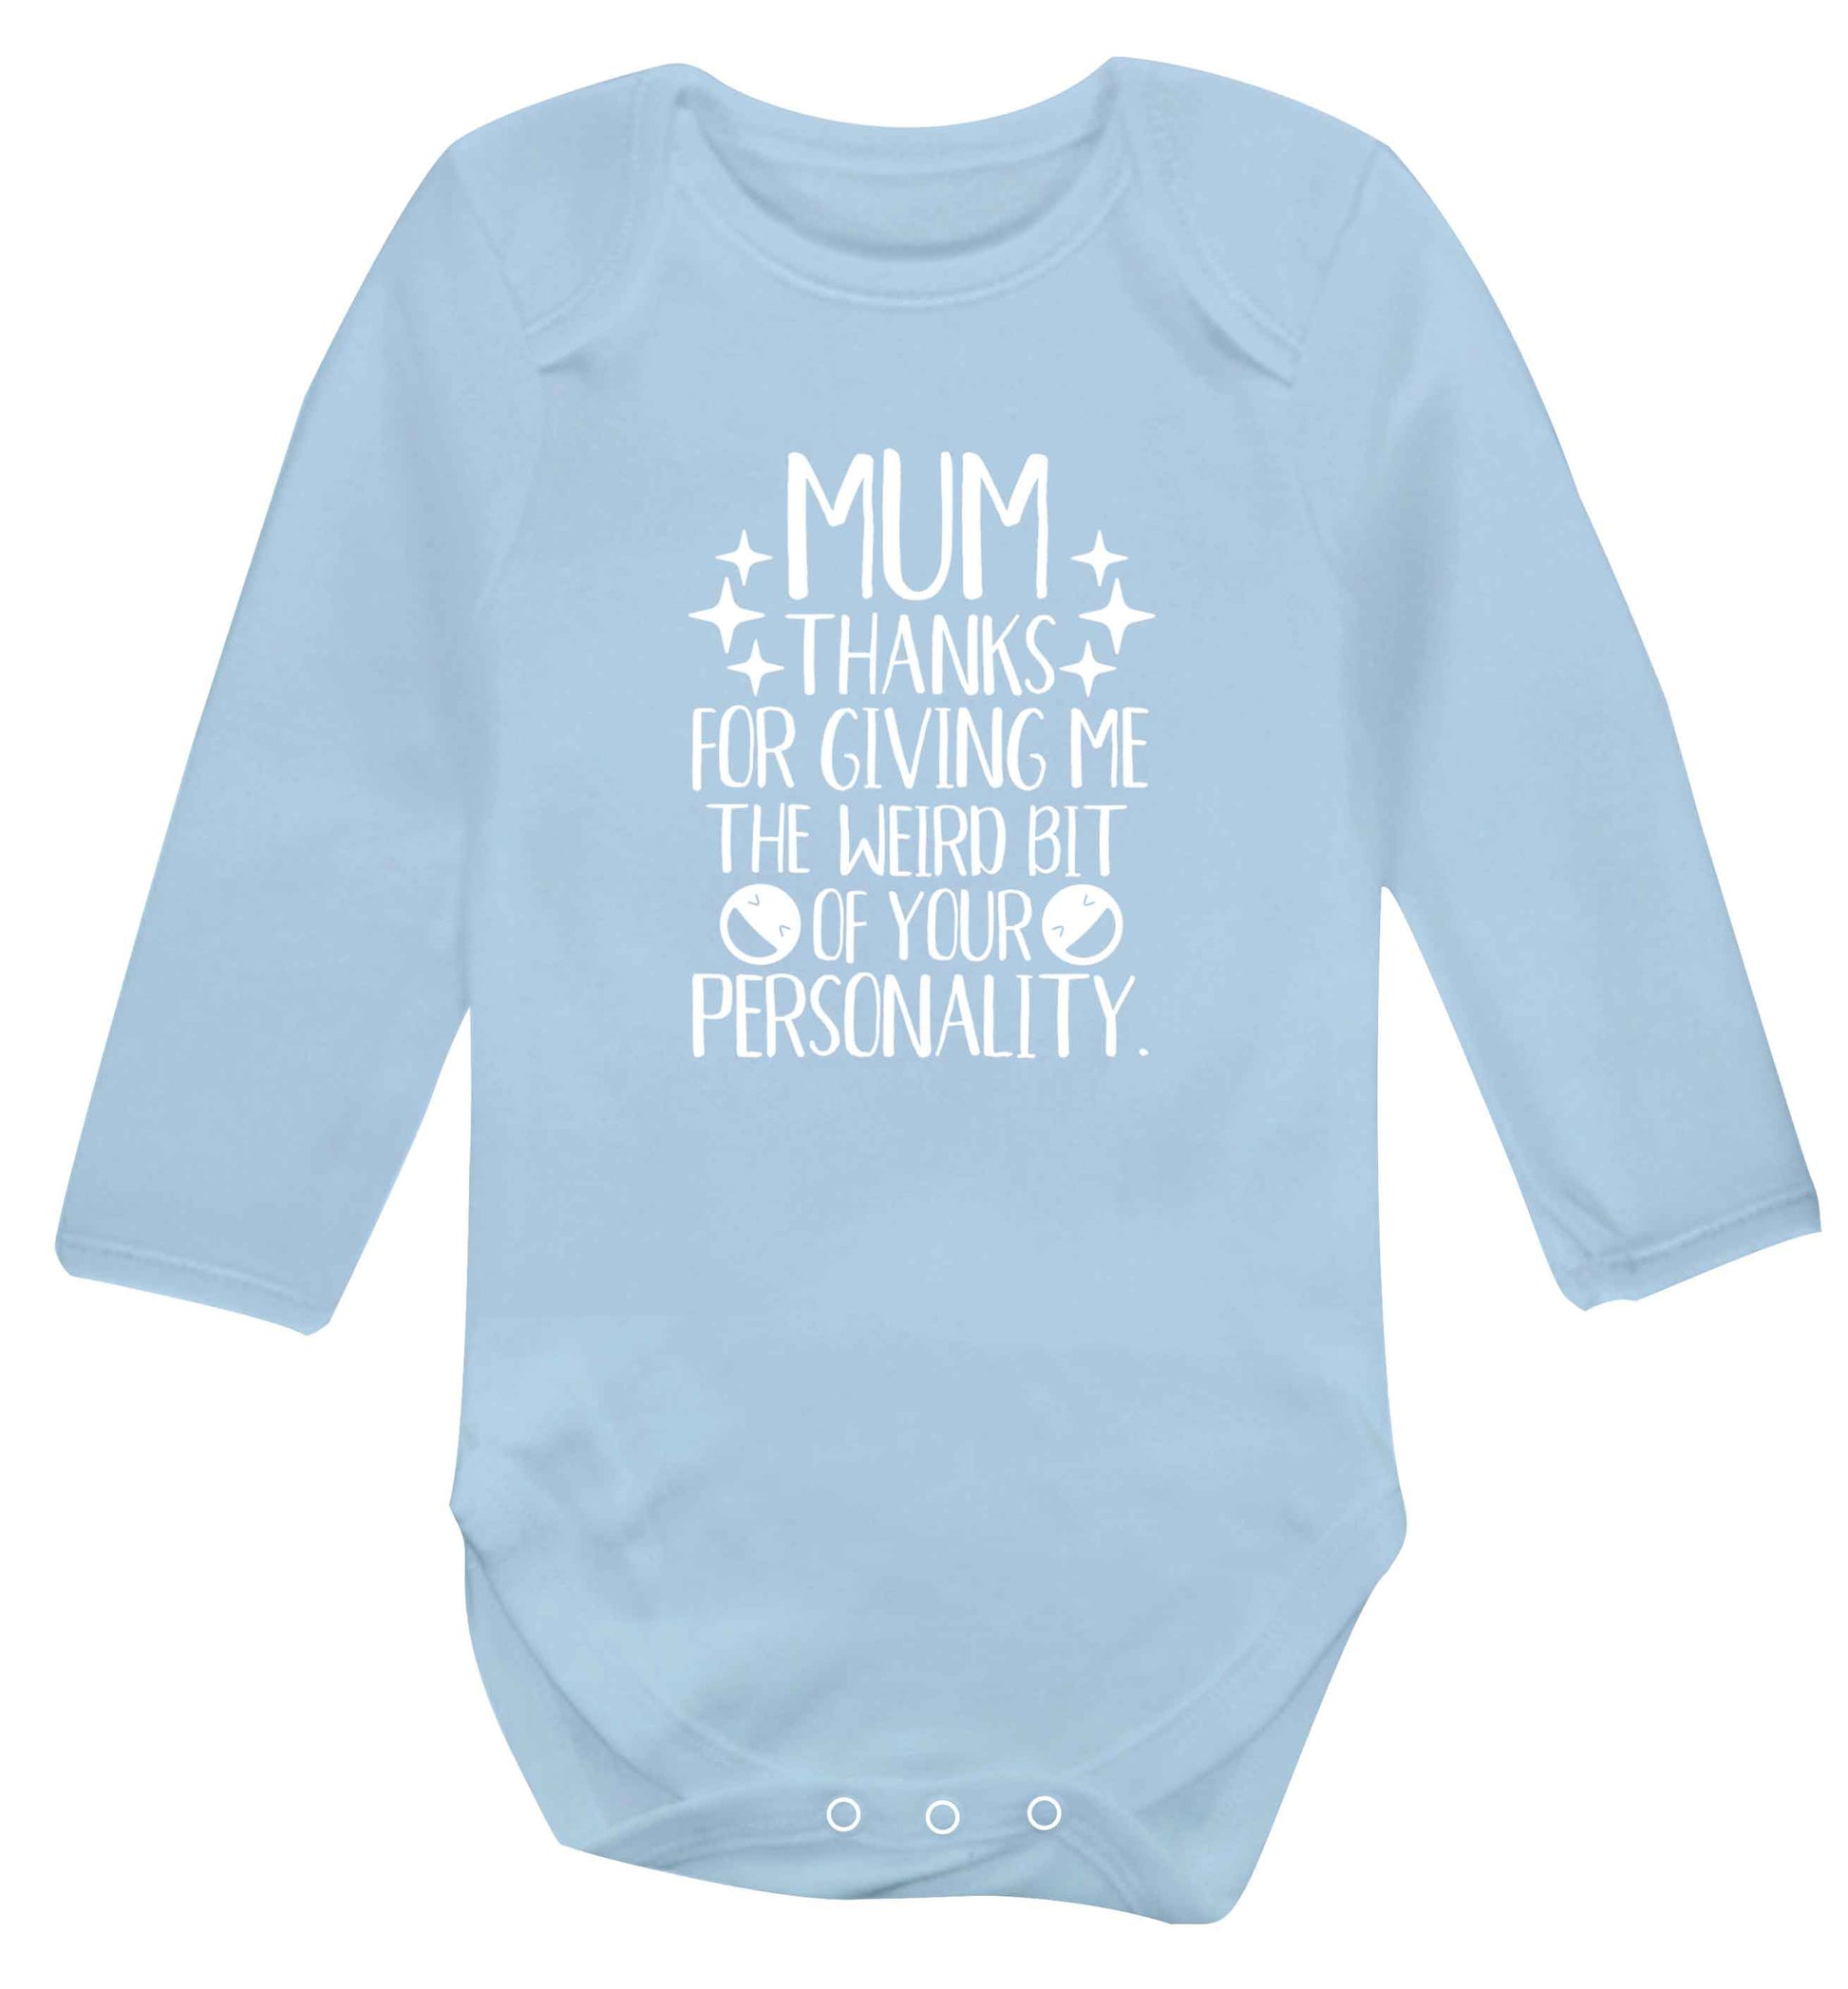 Mum, I love you more than halloumi and if you know me at all you know how deep that is baby vest long sleeved pale blue 6-12 months